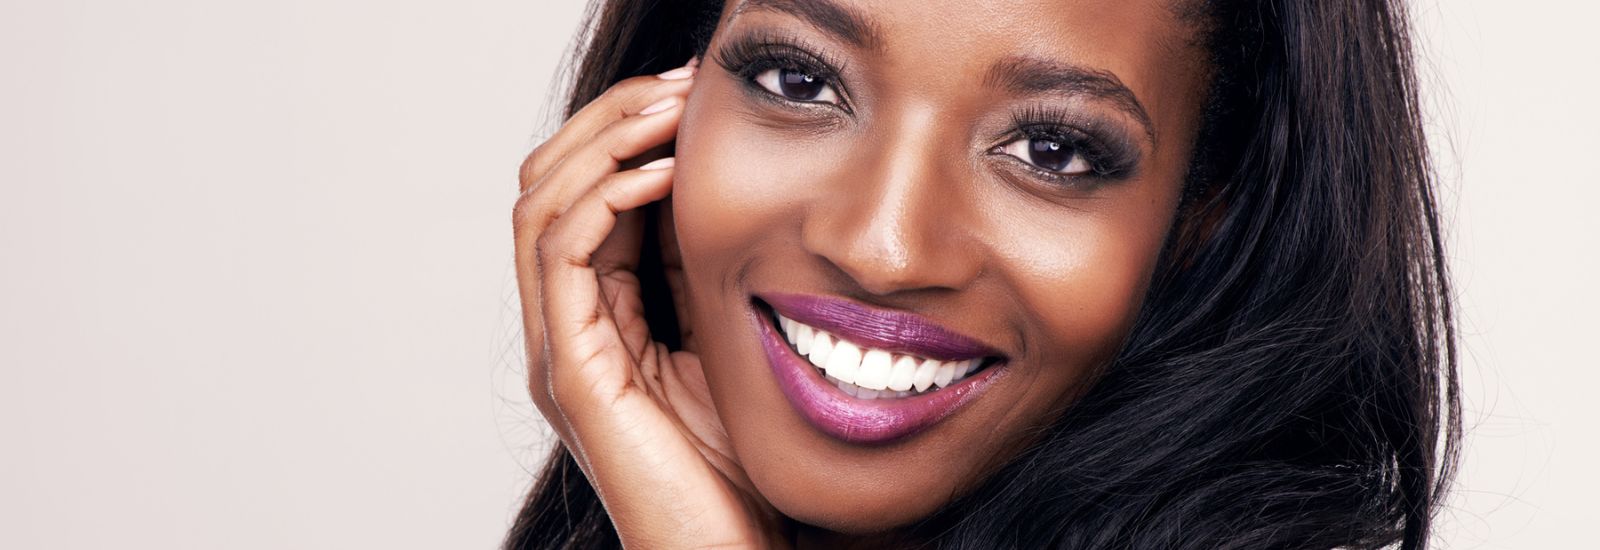 Beauty, smile portrait and face of black woman in studio